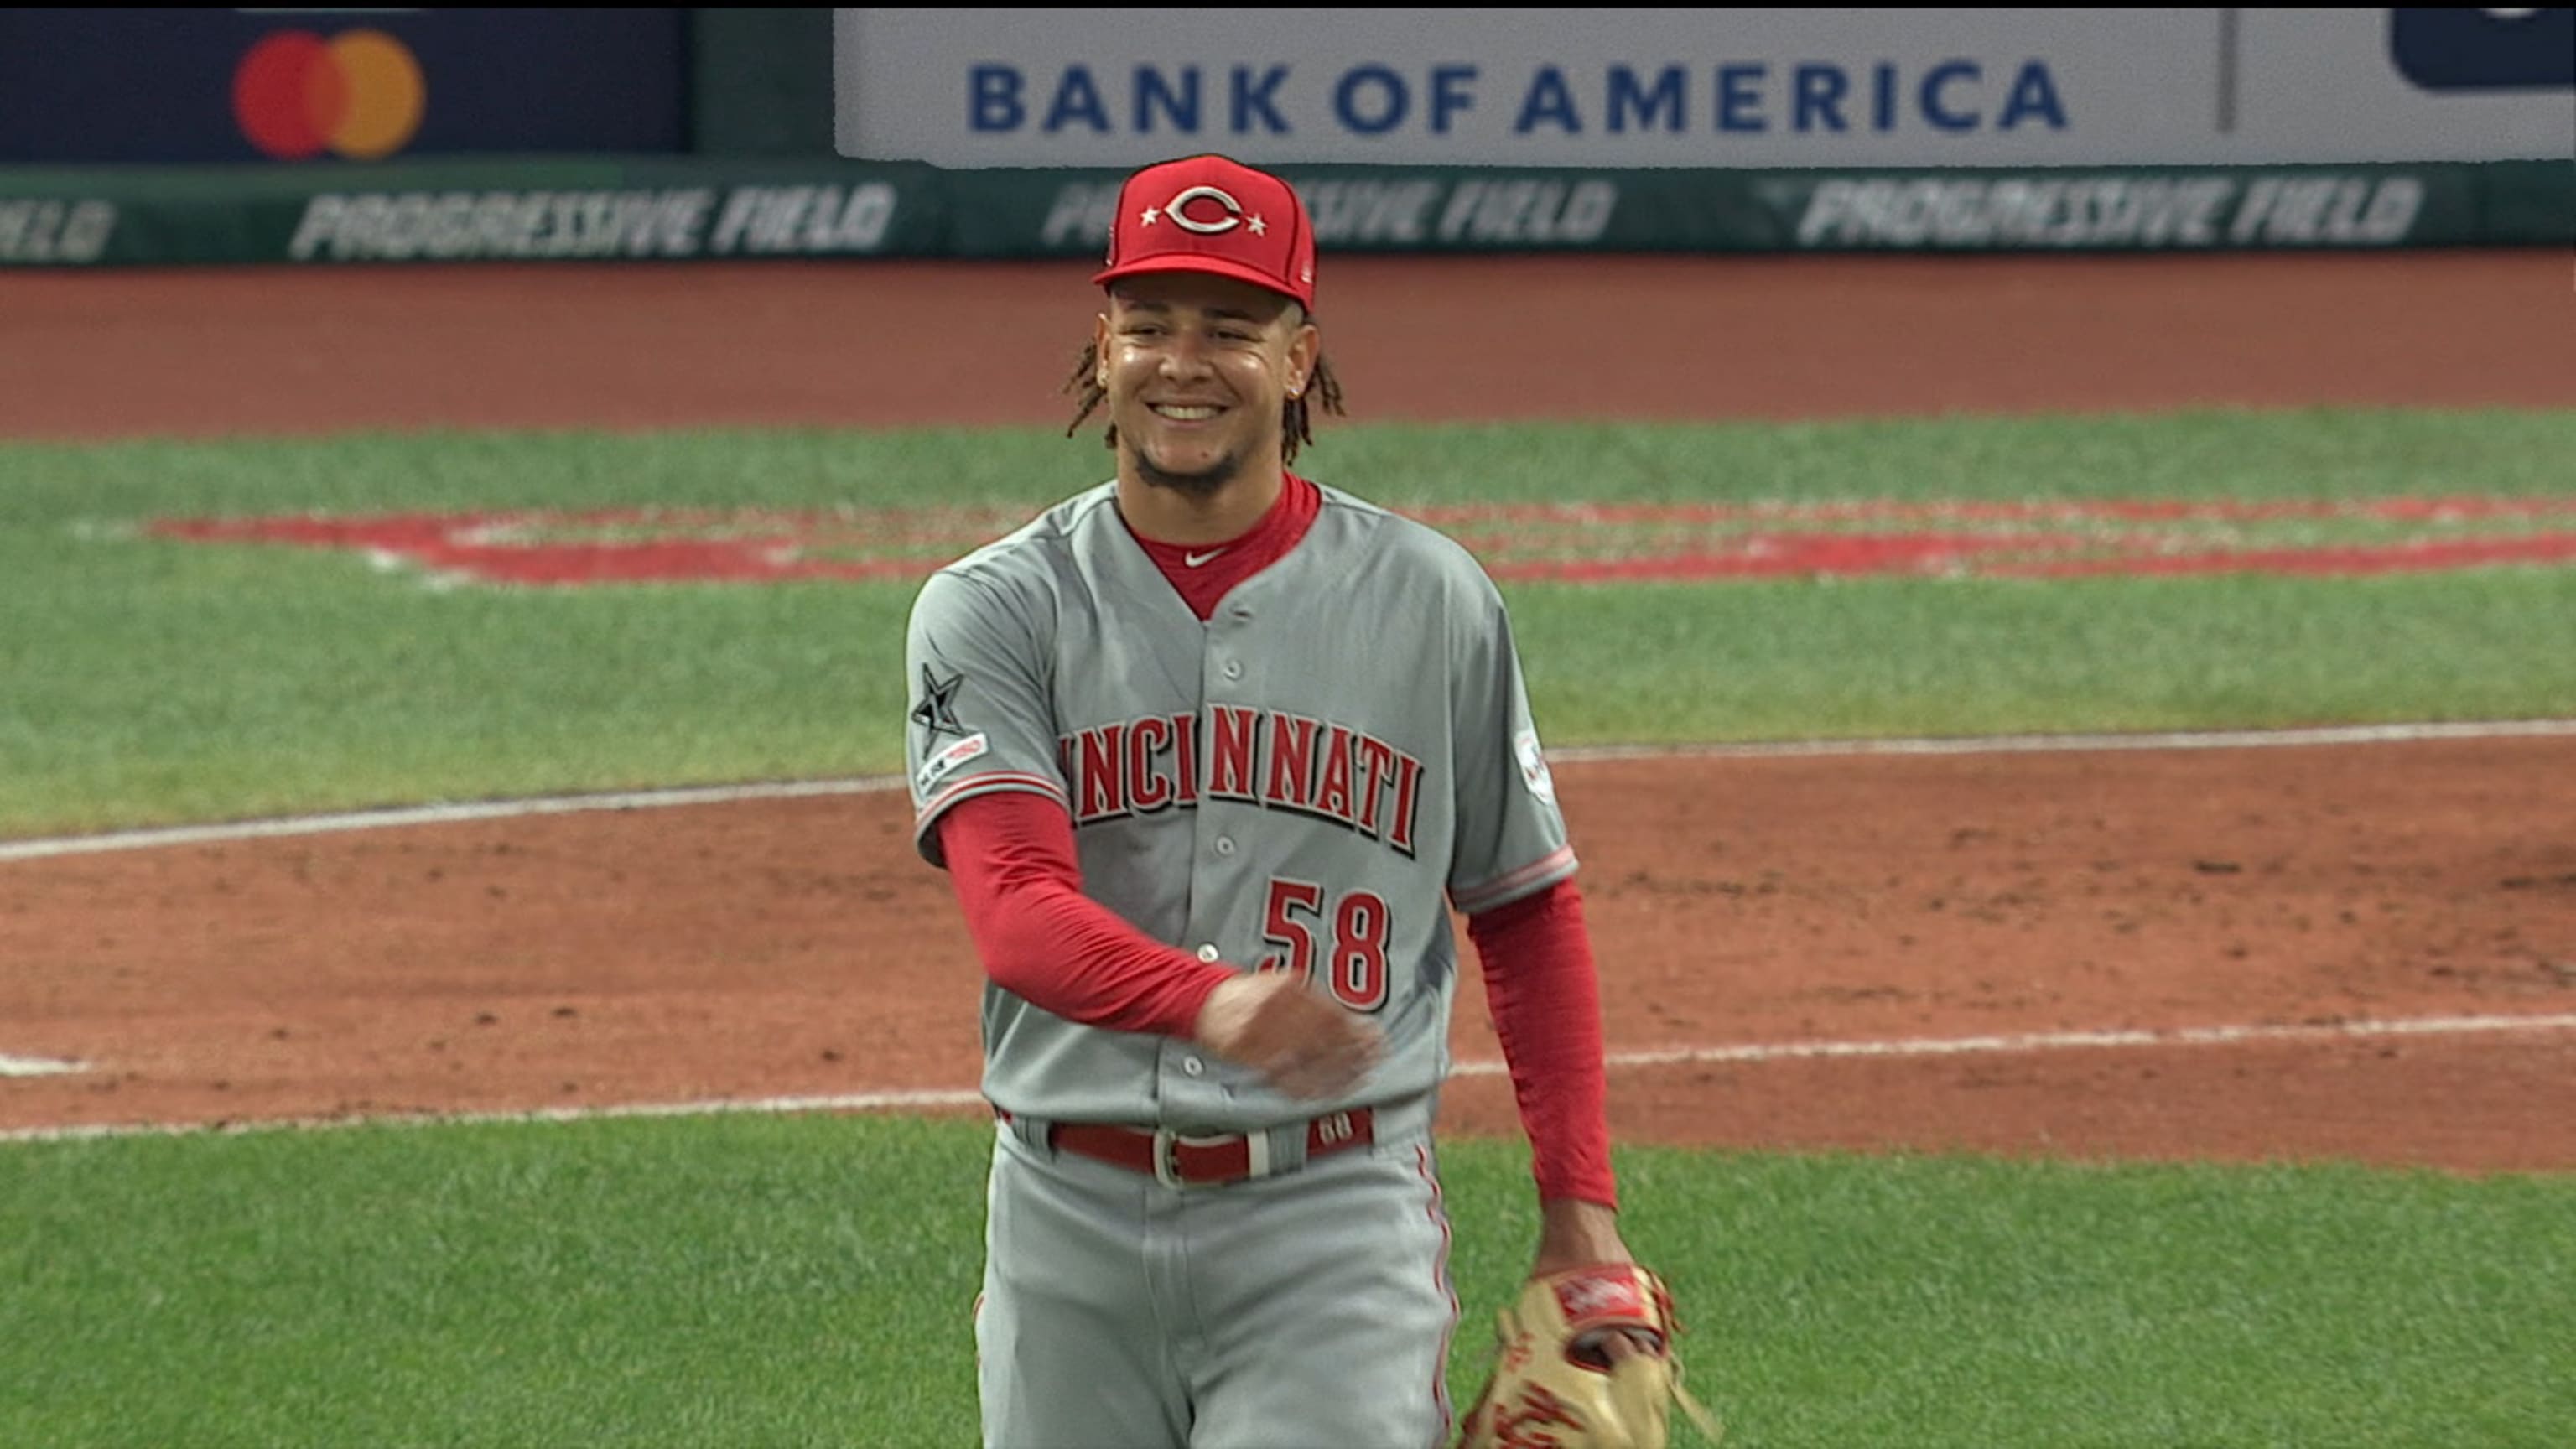 2019 MLB All-Star Game score: American League tops National League